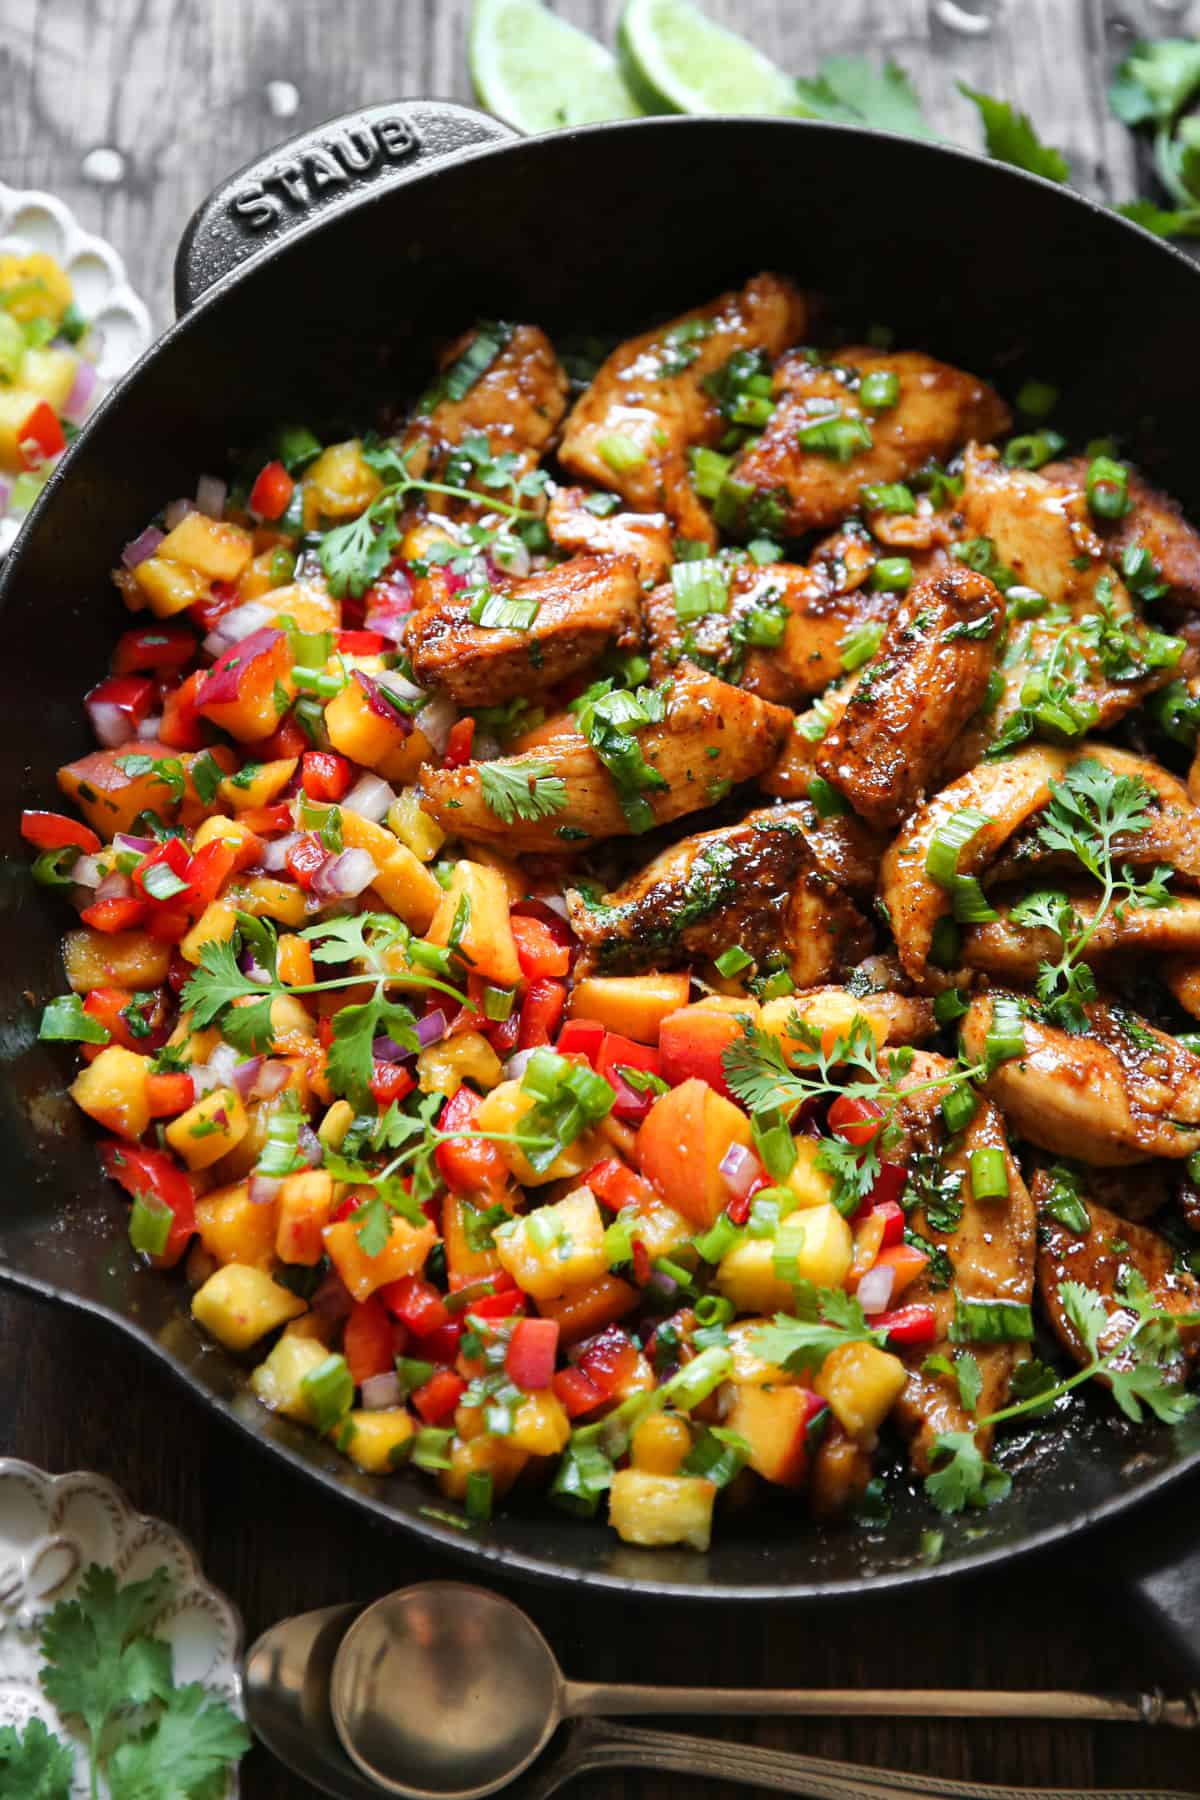 Cilantro-Lime Chicken with Peach Salsa in a cast iron skillet